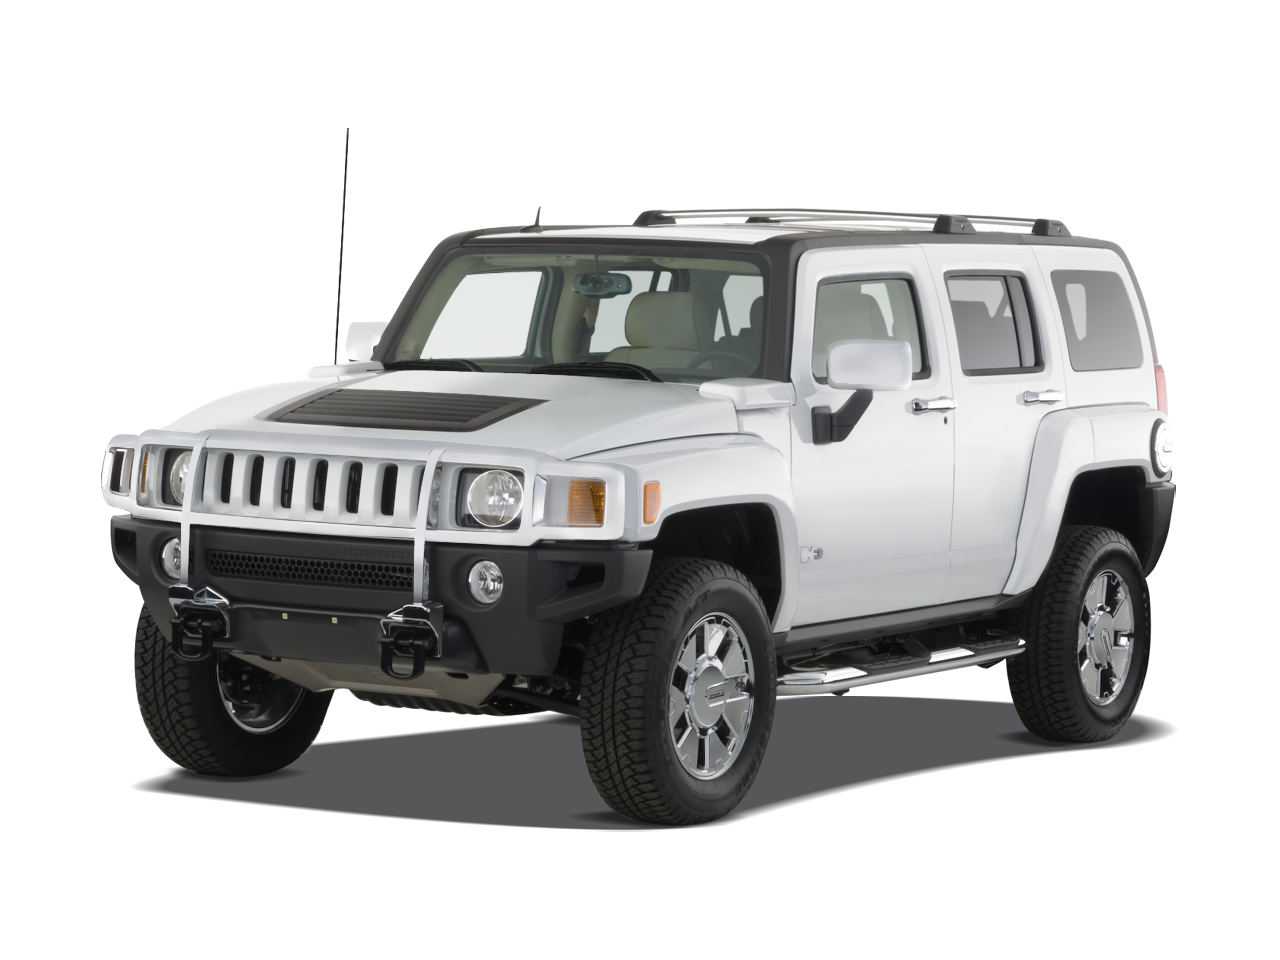 Amazing Hummer H3 Pictures & Backgrounds